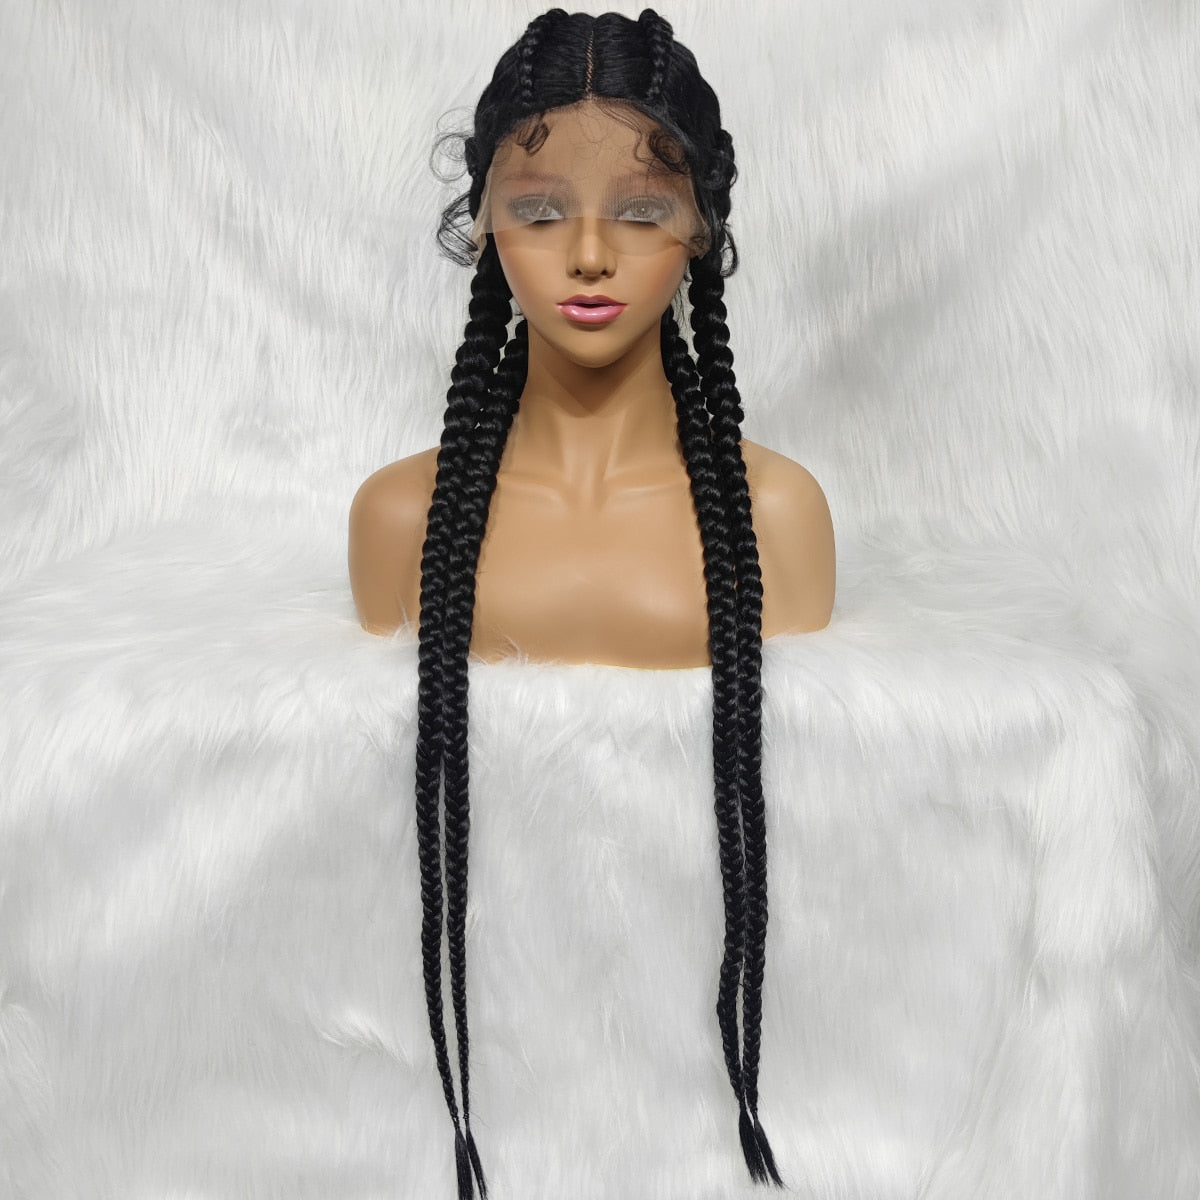 Synthetic Lace Wig Braided Wigs Natural Dark 37" Black Burgundy Wig For Black Women American African Wig - Flexi Africa - Flexi Africa offers Free Delivery Worldwide - Vibrant African traditional clothing showcasing bold prints and intricate designs